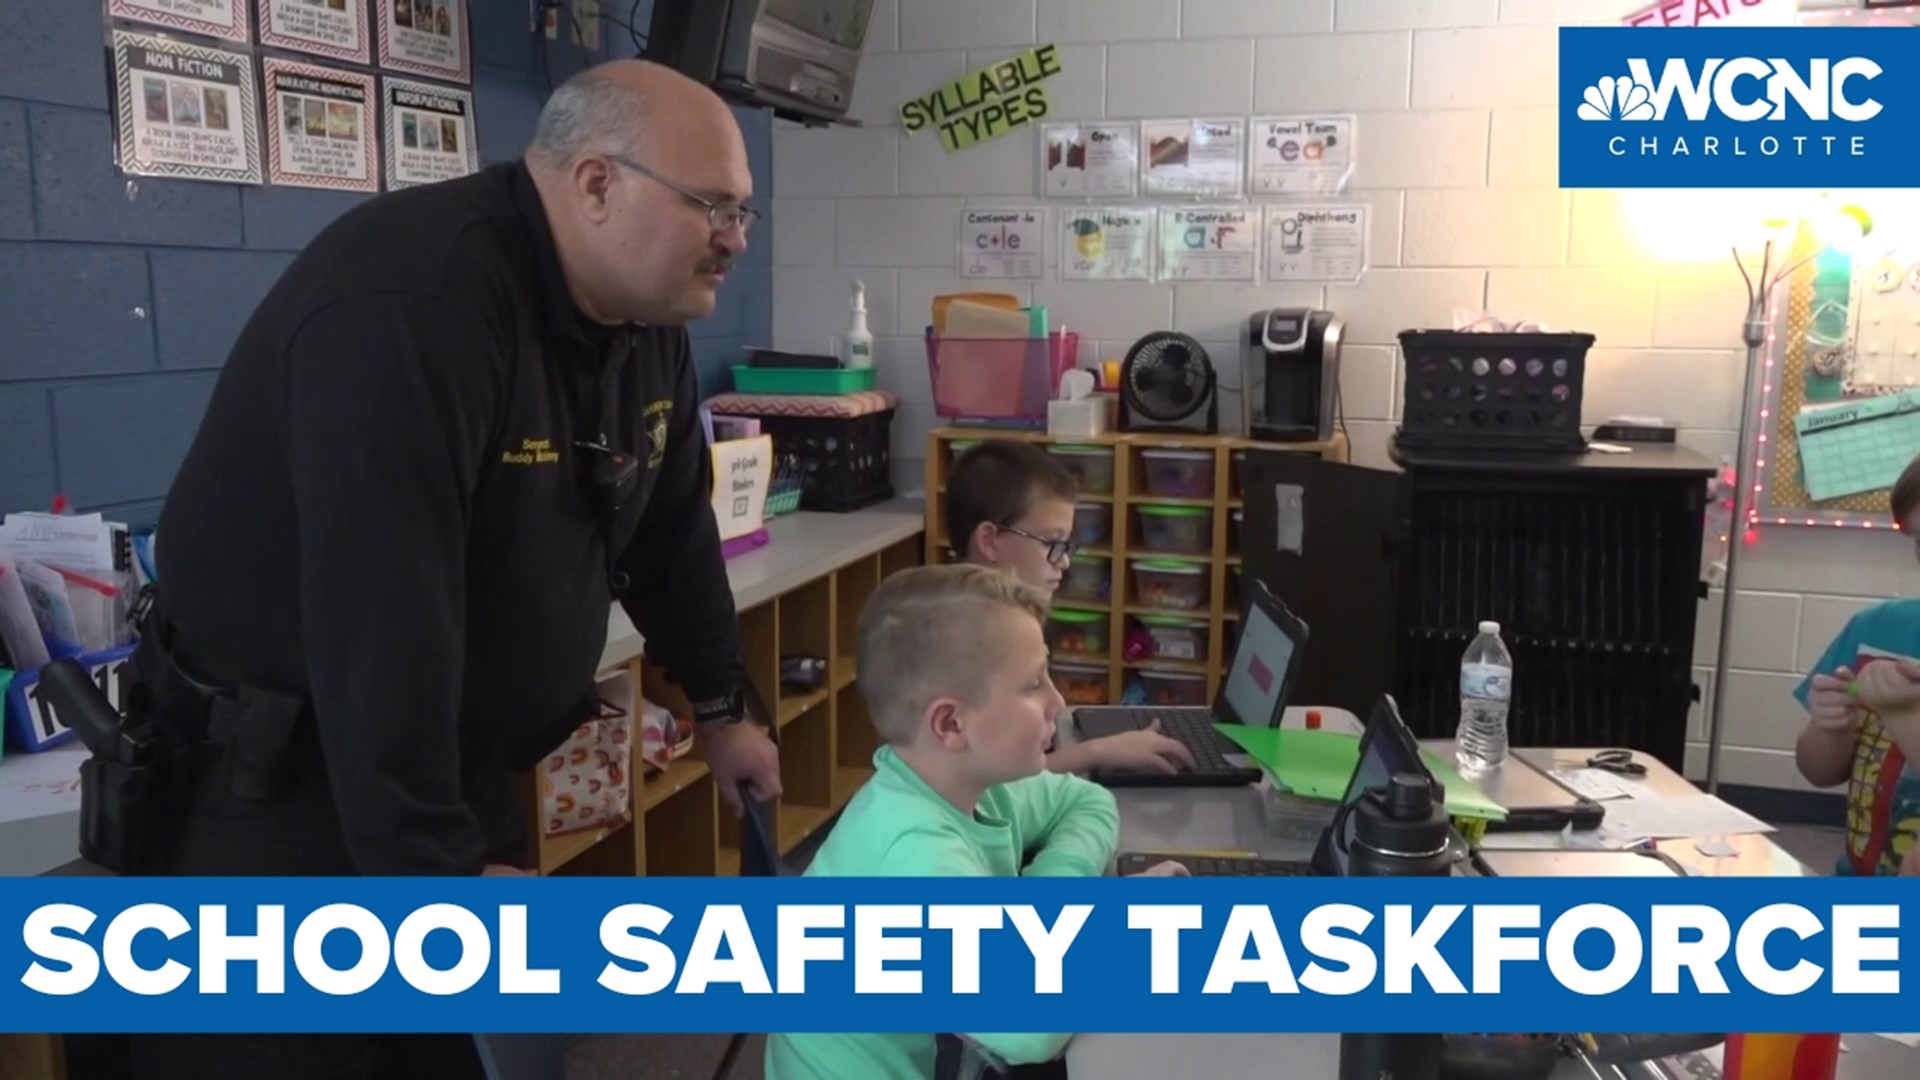 The taskforce is teaching both adults and students different ways to deescalate situations that could lead to violence in schools.